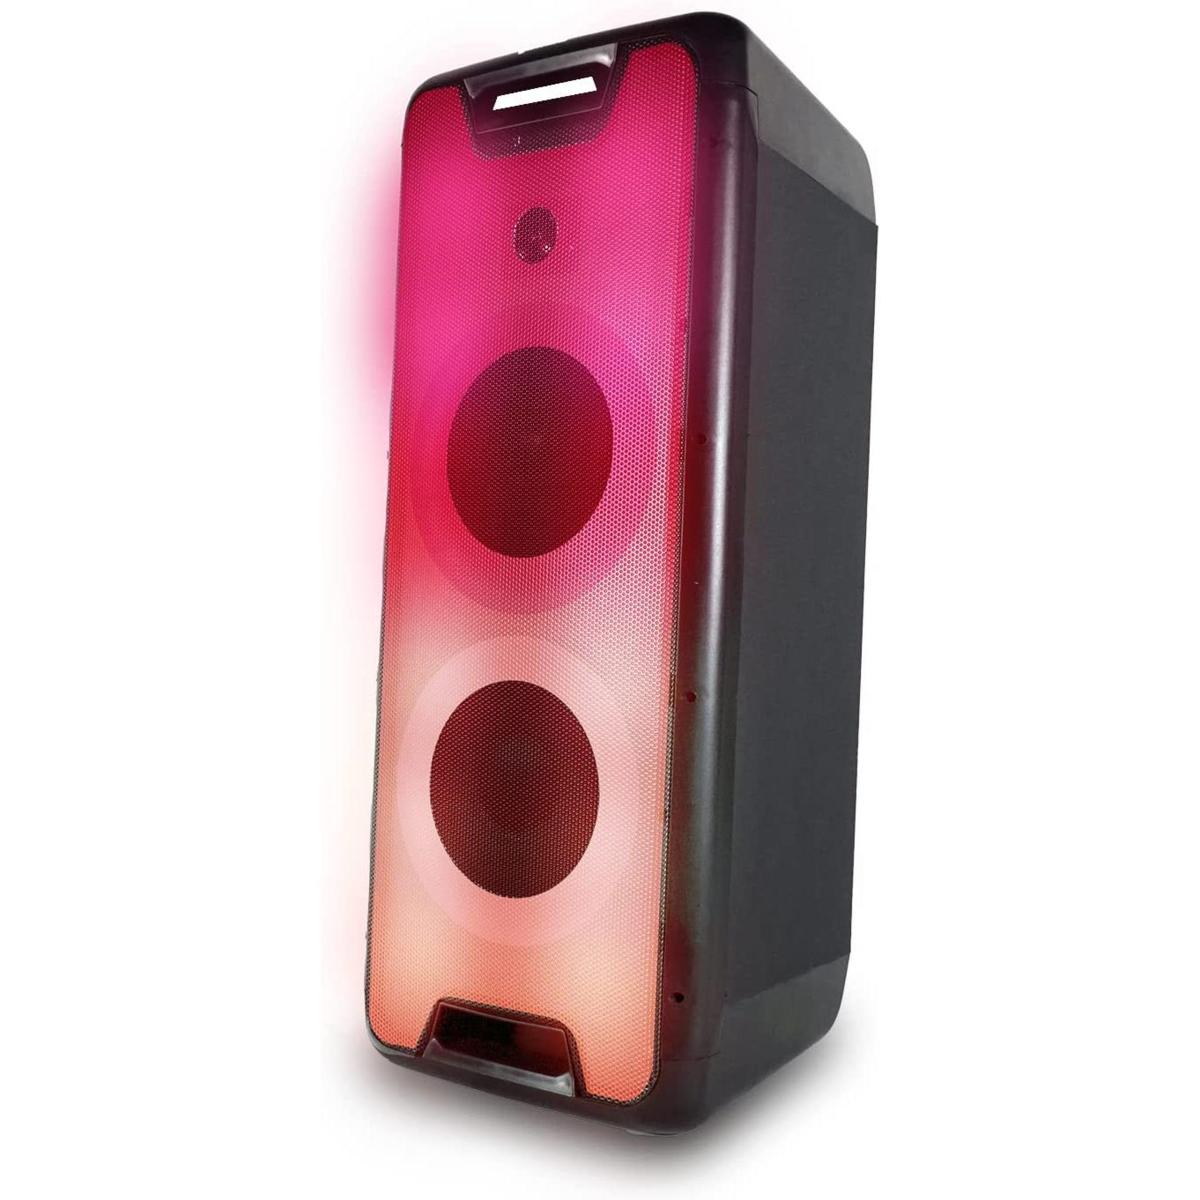 Gemini Sound GLS-880 Portable Wireless Bluetooth Speakers System with Party Lights and Microphone.